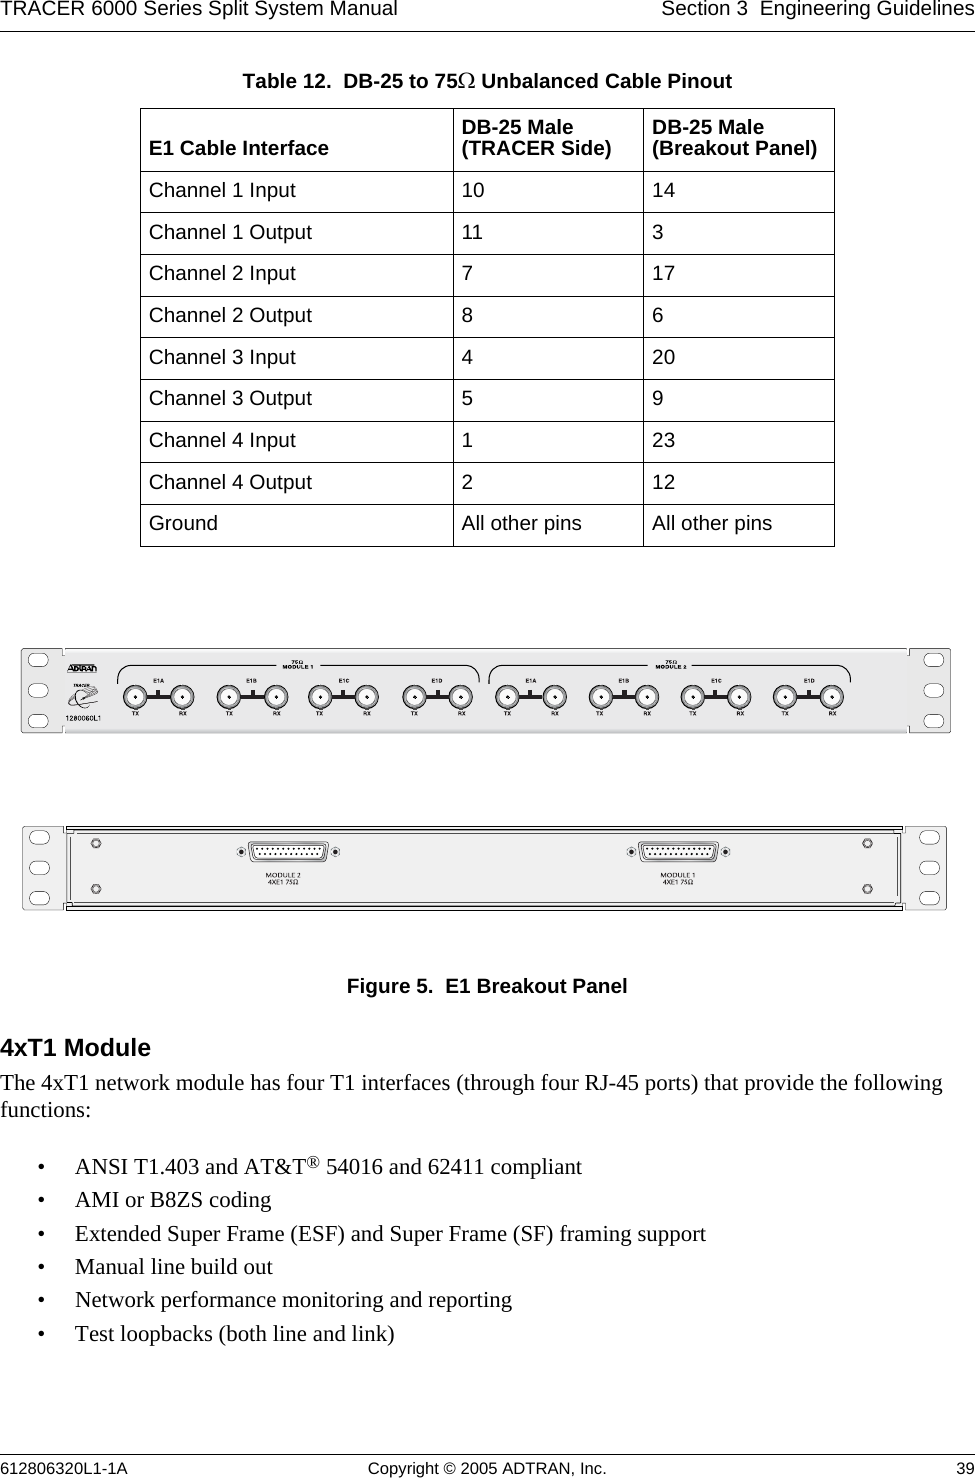 TRACER 6000 Series Split System Manual Section 3  Engineering Guidelines612806320L1-1A Copyright © 2005 ADTRAN, Inc. 39Figure 5.  E1 Breakout Panel4xT1 ModuleThe 4xT1 network module has four T1 interfaces (through four RJ-45 ports) that provide the following functions:• ANSI T1.403 and AT&amp;T® 54016 and 62411 compliant• AMI or B8ZS coding• Extended Super Frame (ESF) and Super Frame (SF) framing support• Manual line build out• Network performance monitoring and reporting• Test loopbacks (both line and link)Table 12.  DB-25 to 75Ω Unbalanced Cable PinoutE1 Cable Interface DB-25 Male (TRACER Side) DB-25 Male (Breakout Panel)Channel 1 Input 10 14Channel 1 Output 11 3Channel 2 Input 717Channel 2 Output 8 6Channel 3 Input 420Channel 3 Output 5 9Channel 4 Input 123Channel 4 Output 212Ground All other pins All other pins